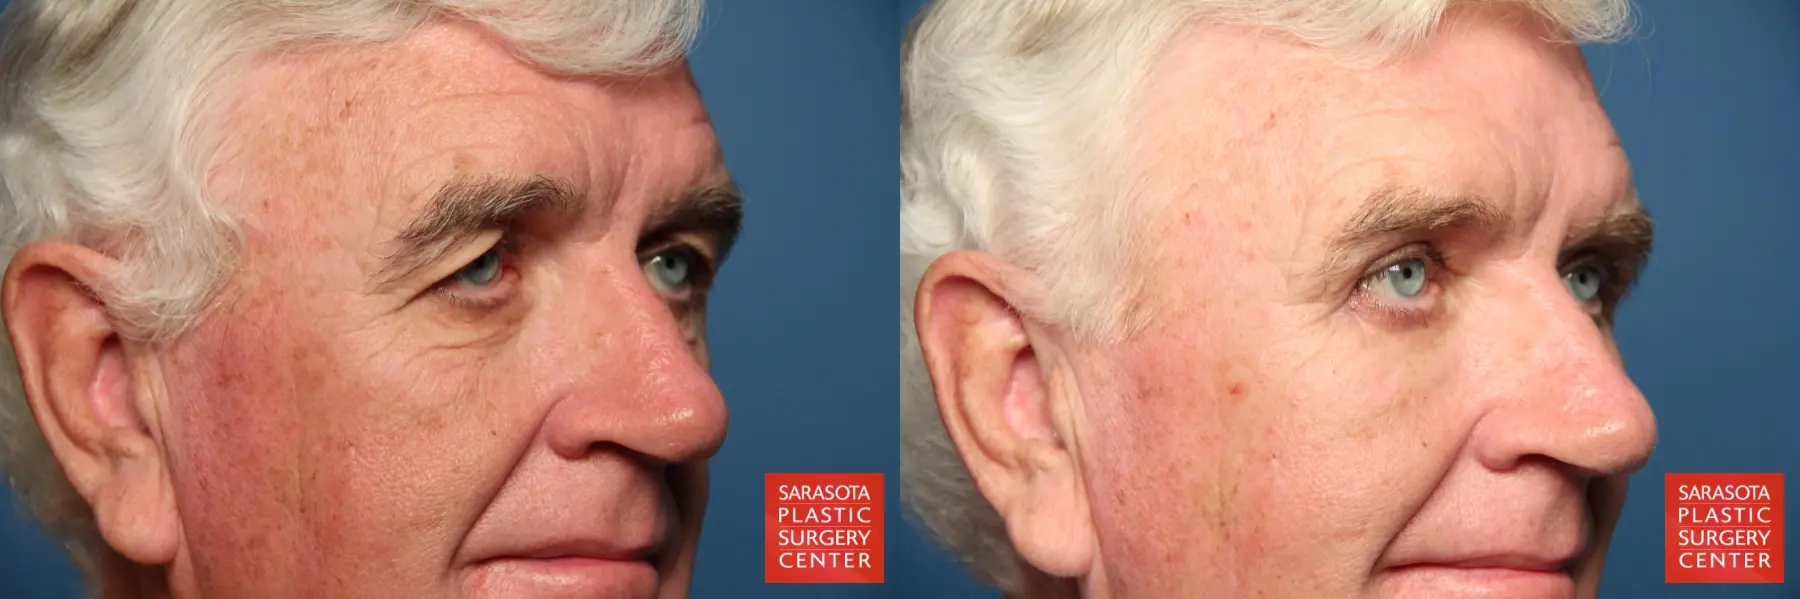 Eyelid Lift For Men: Patient 1 - Before and After 2